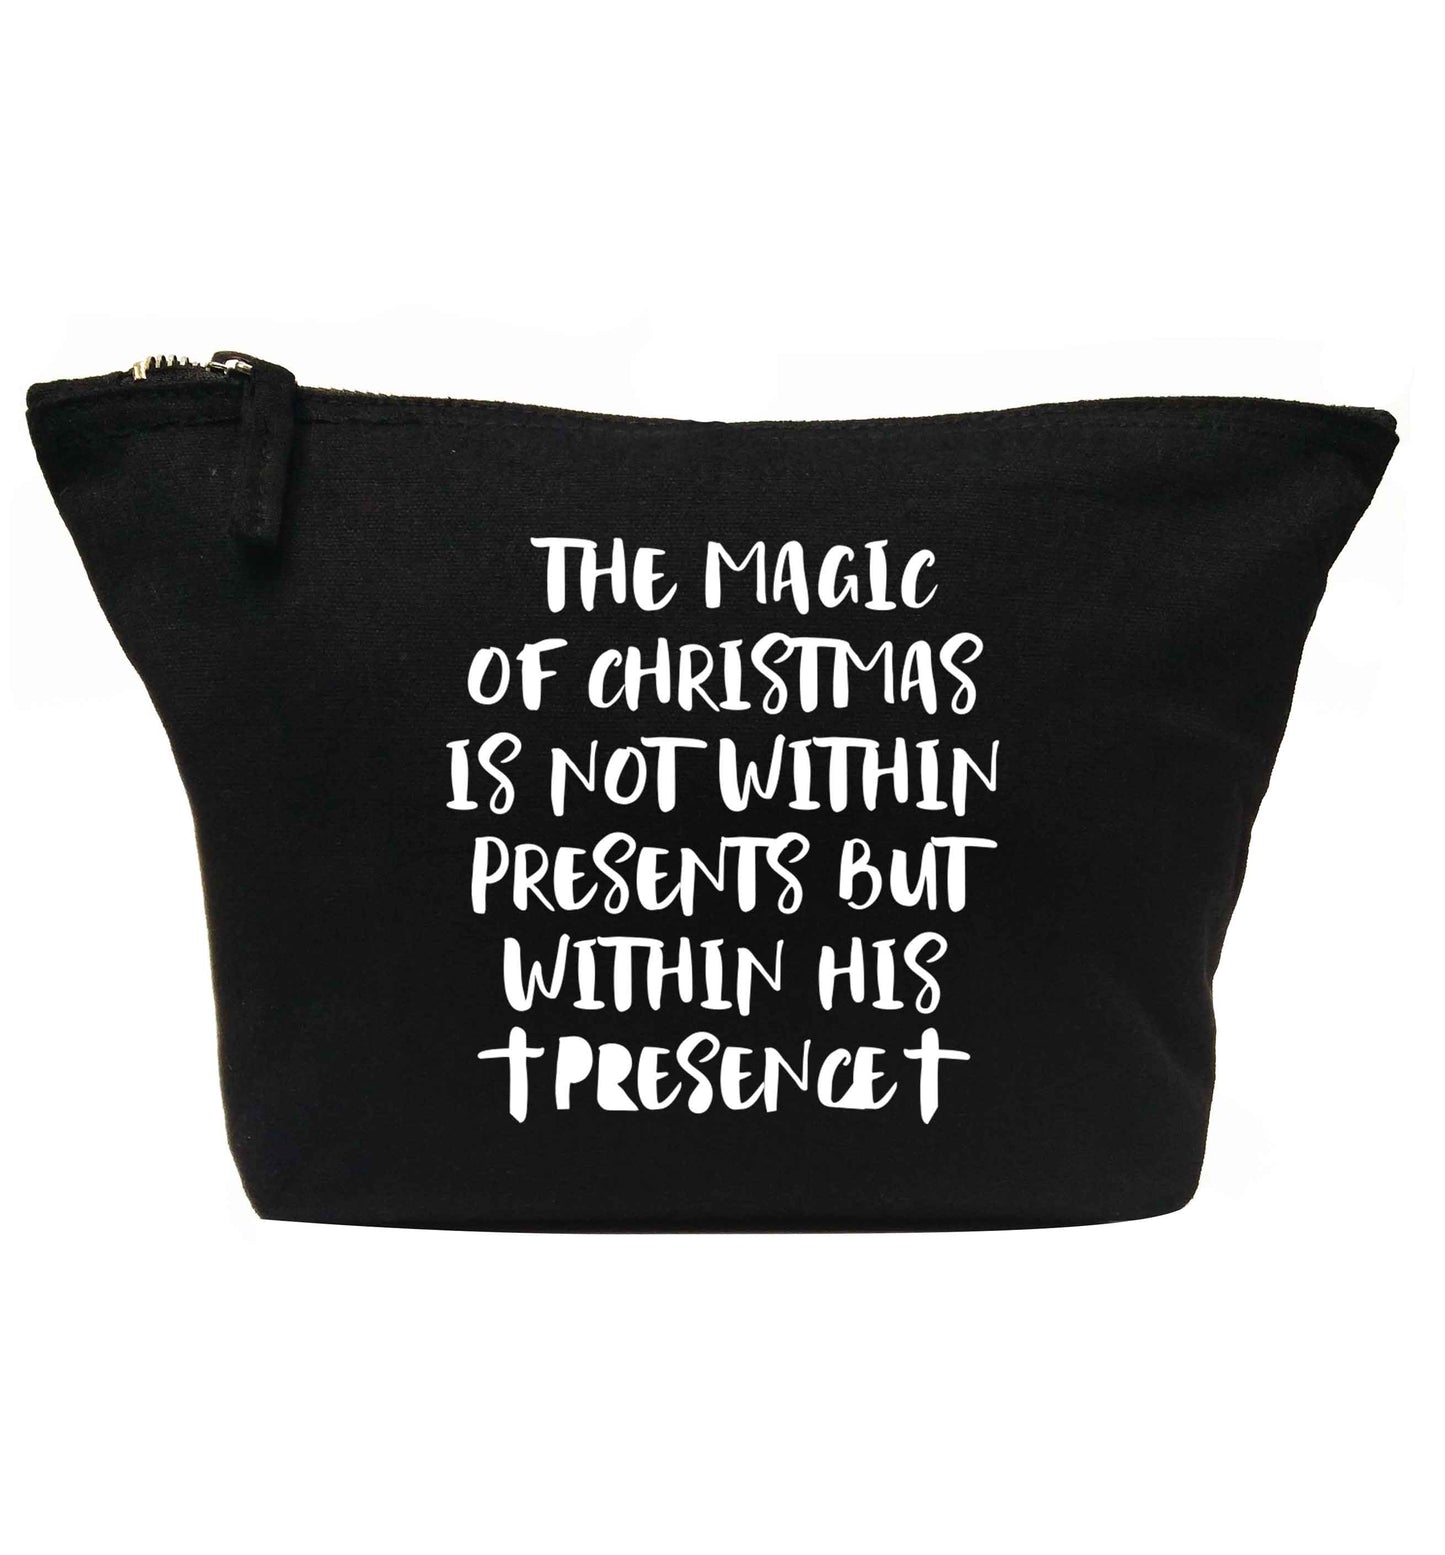 The magic of Christmas is not within presents but within his presence | makeup / wash bag